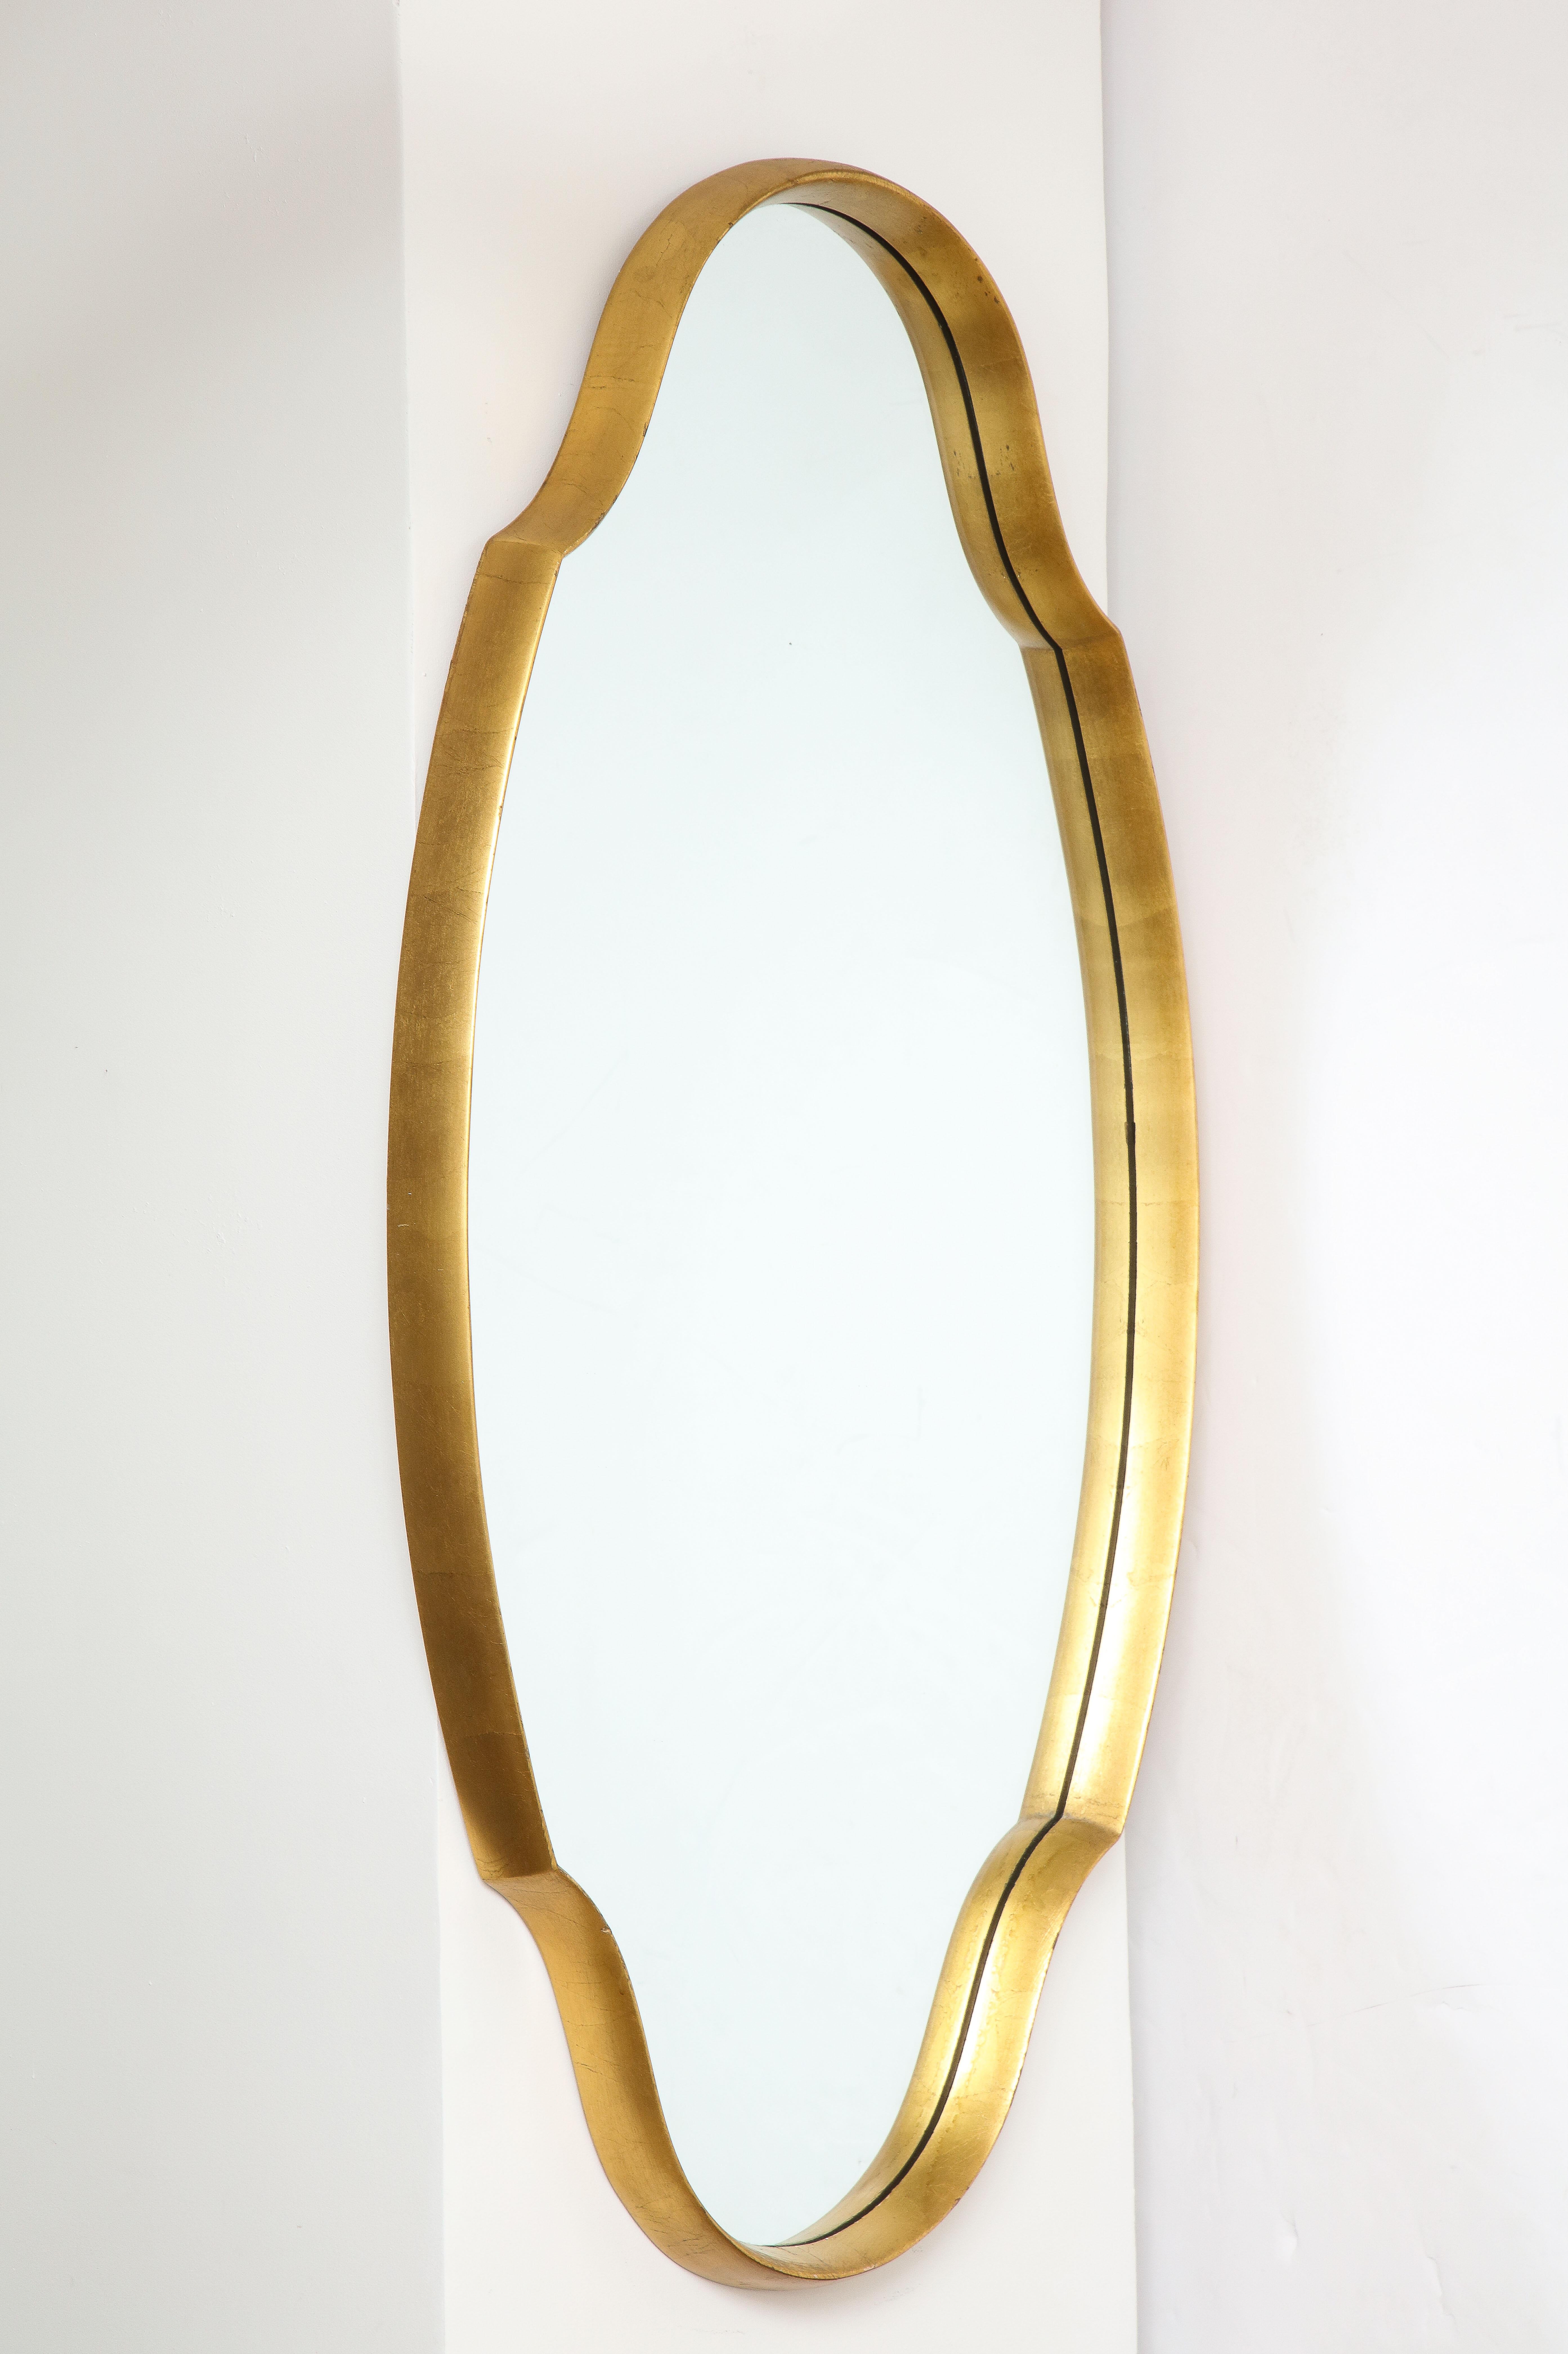 1960's Mid-Century Modern Gold Leaf Mirror in the Style of La Barge For Sale 1